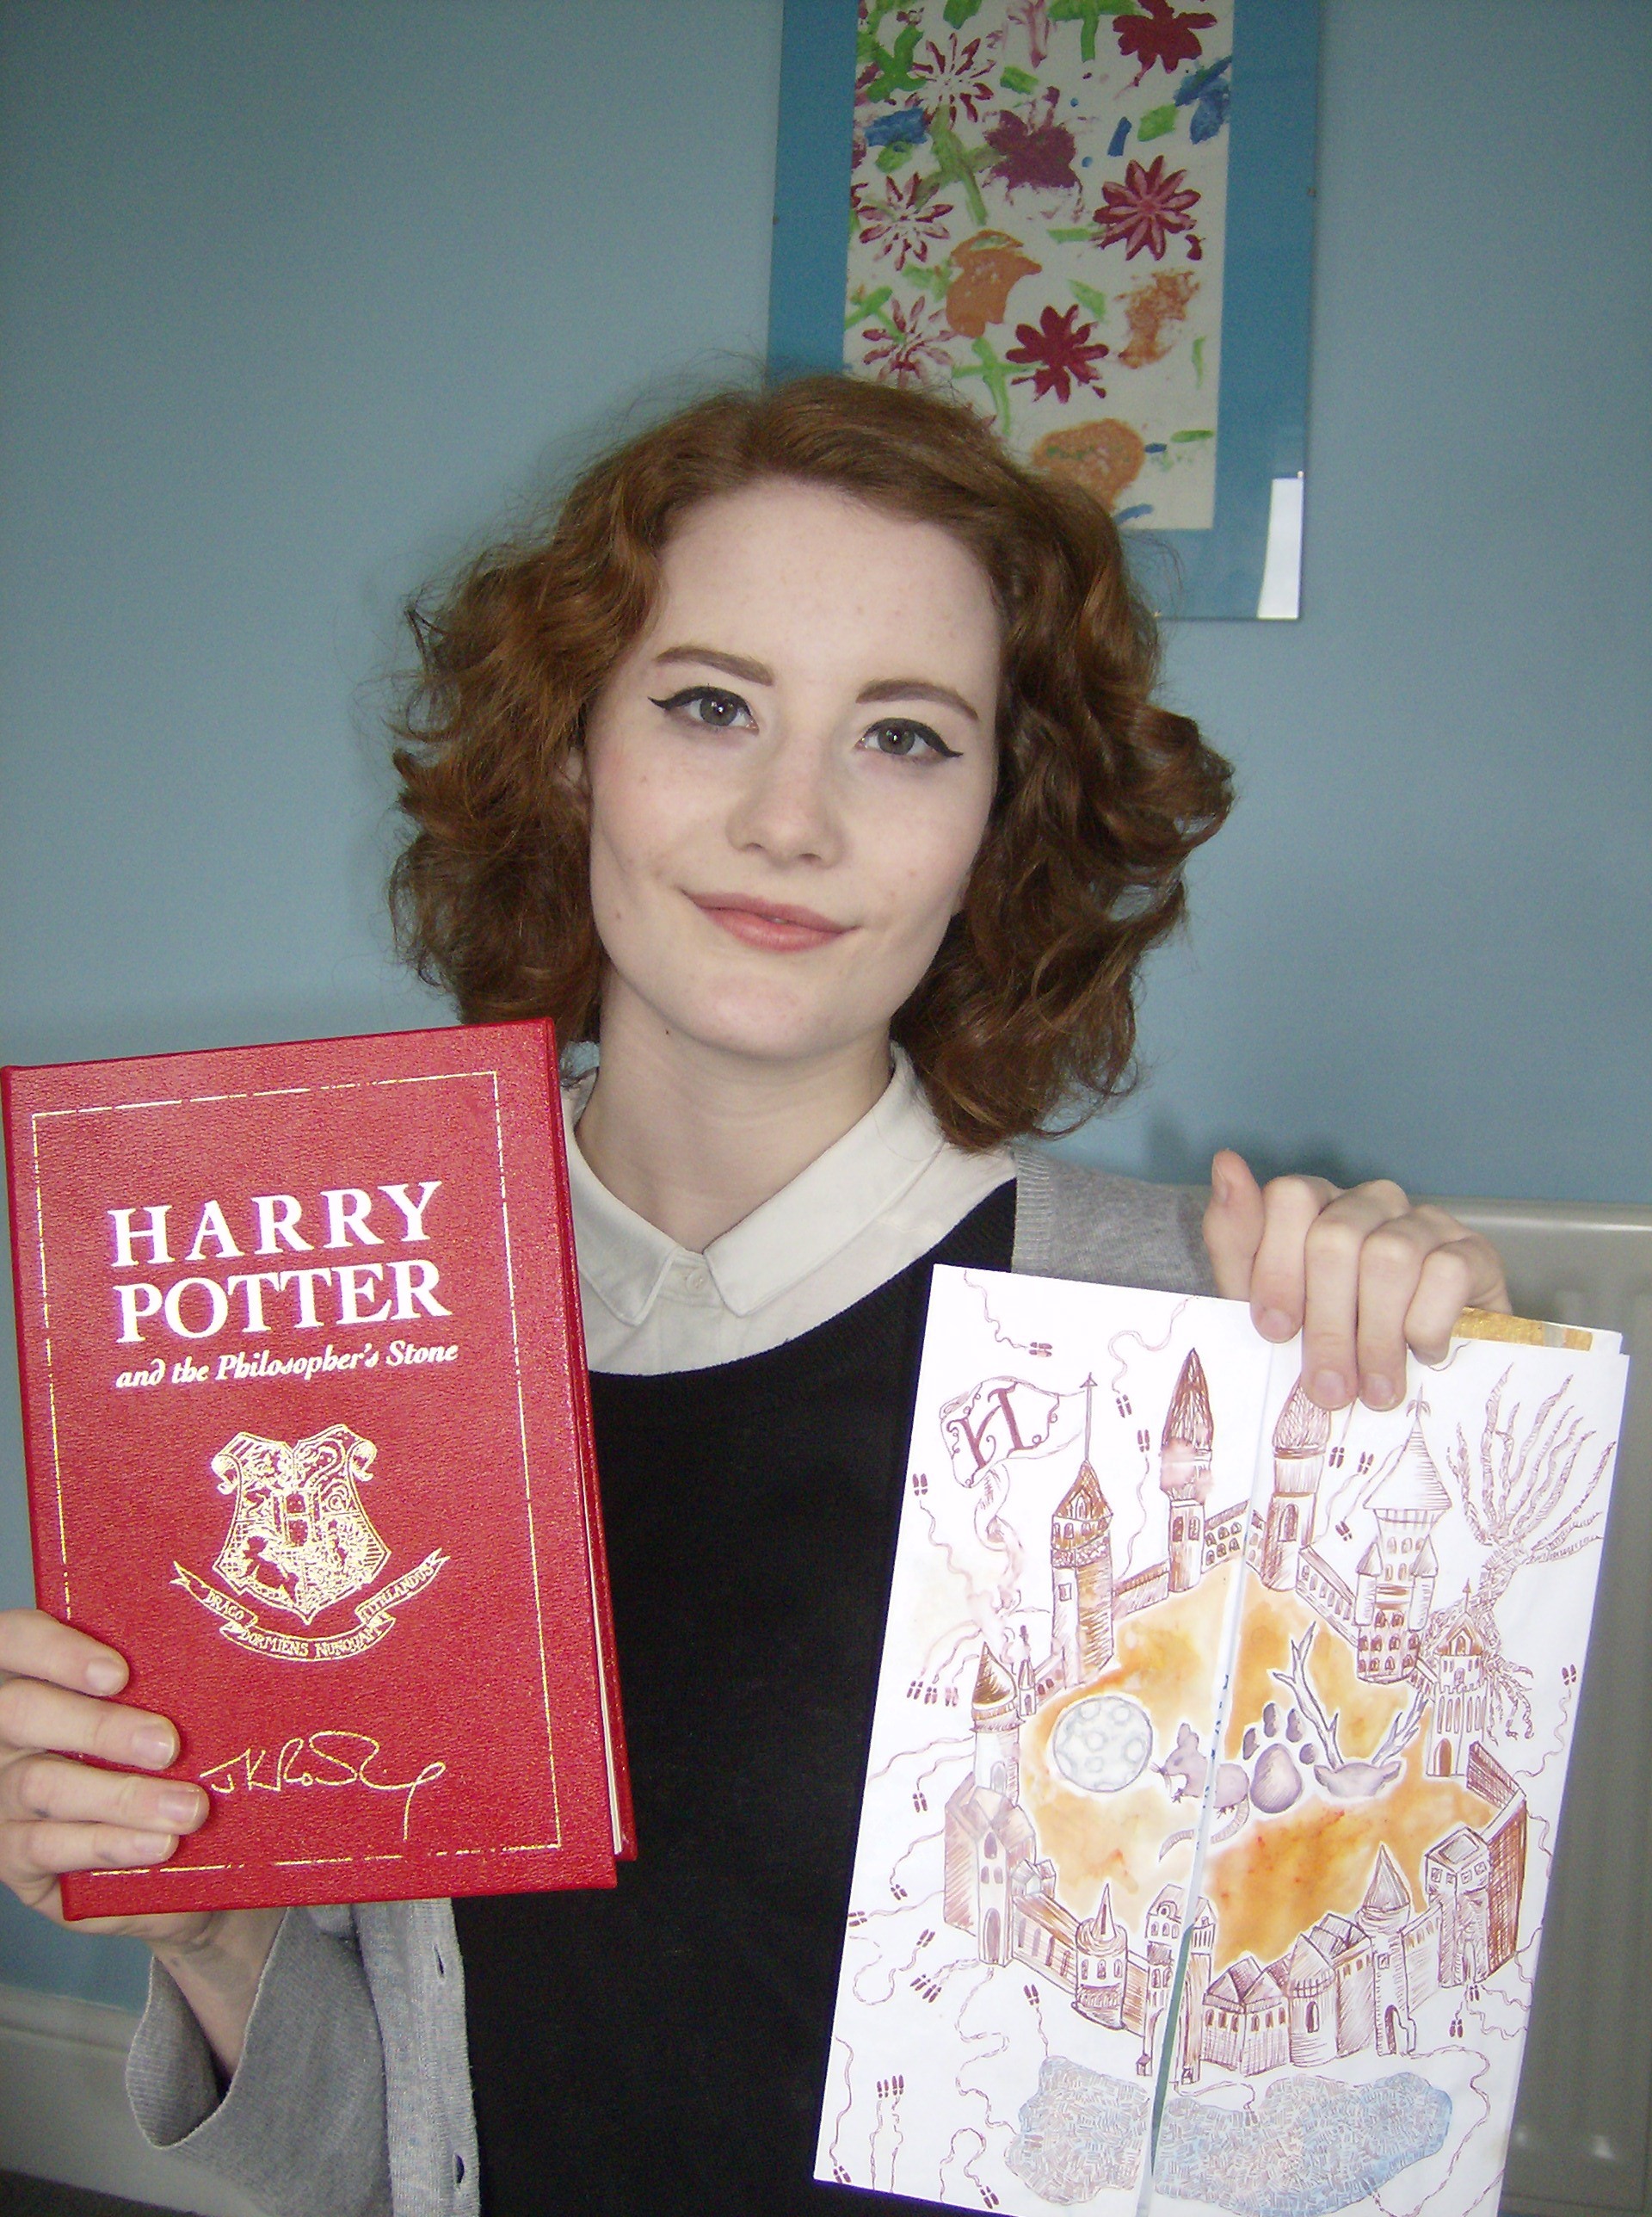 Chloe at the age of 16 with her Harry Potter book prize and entry